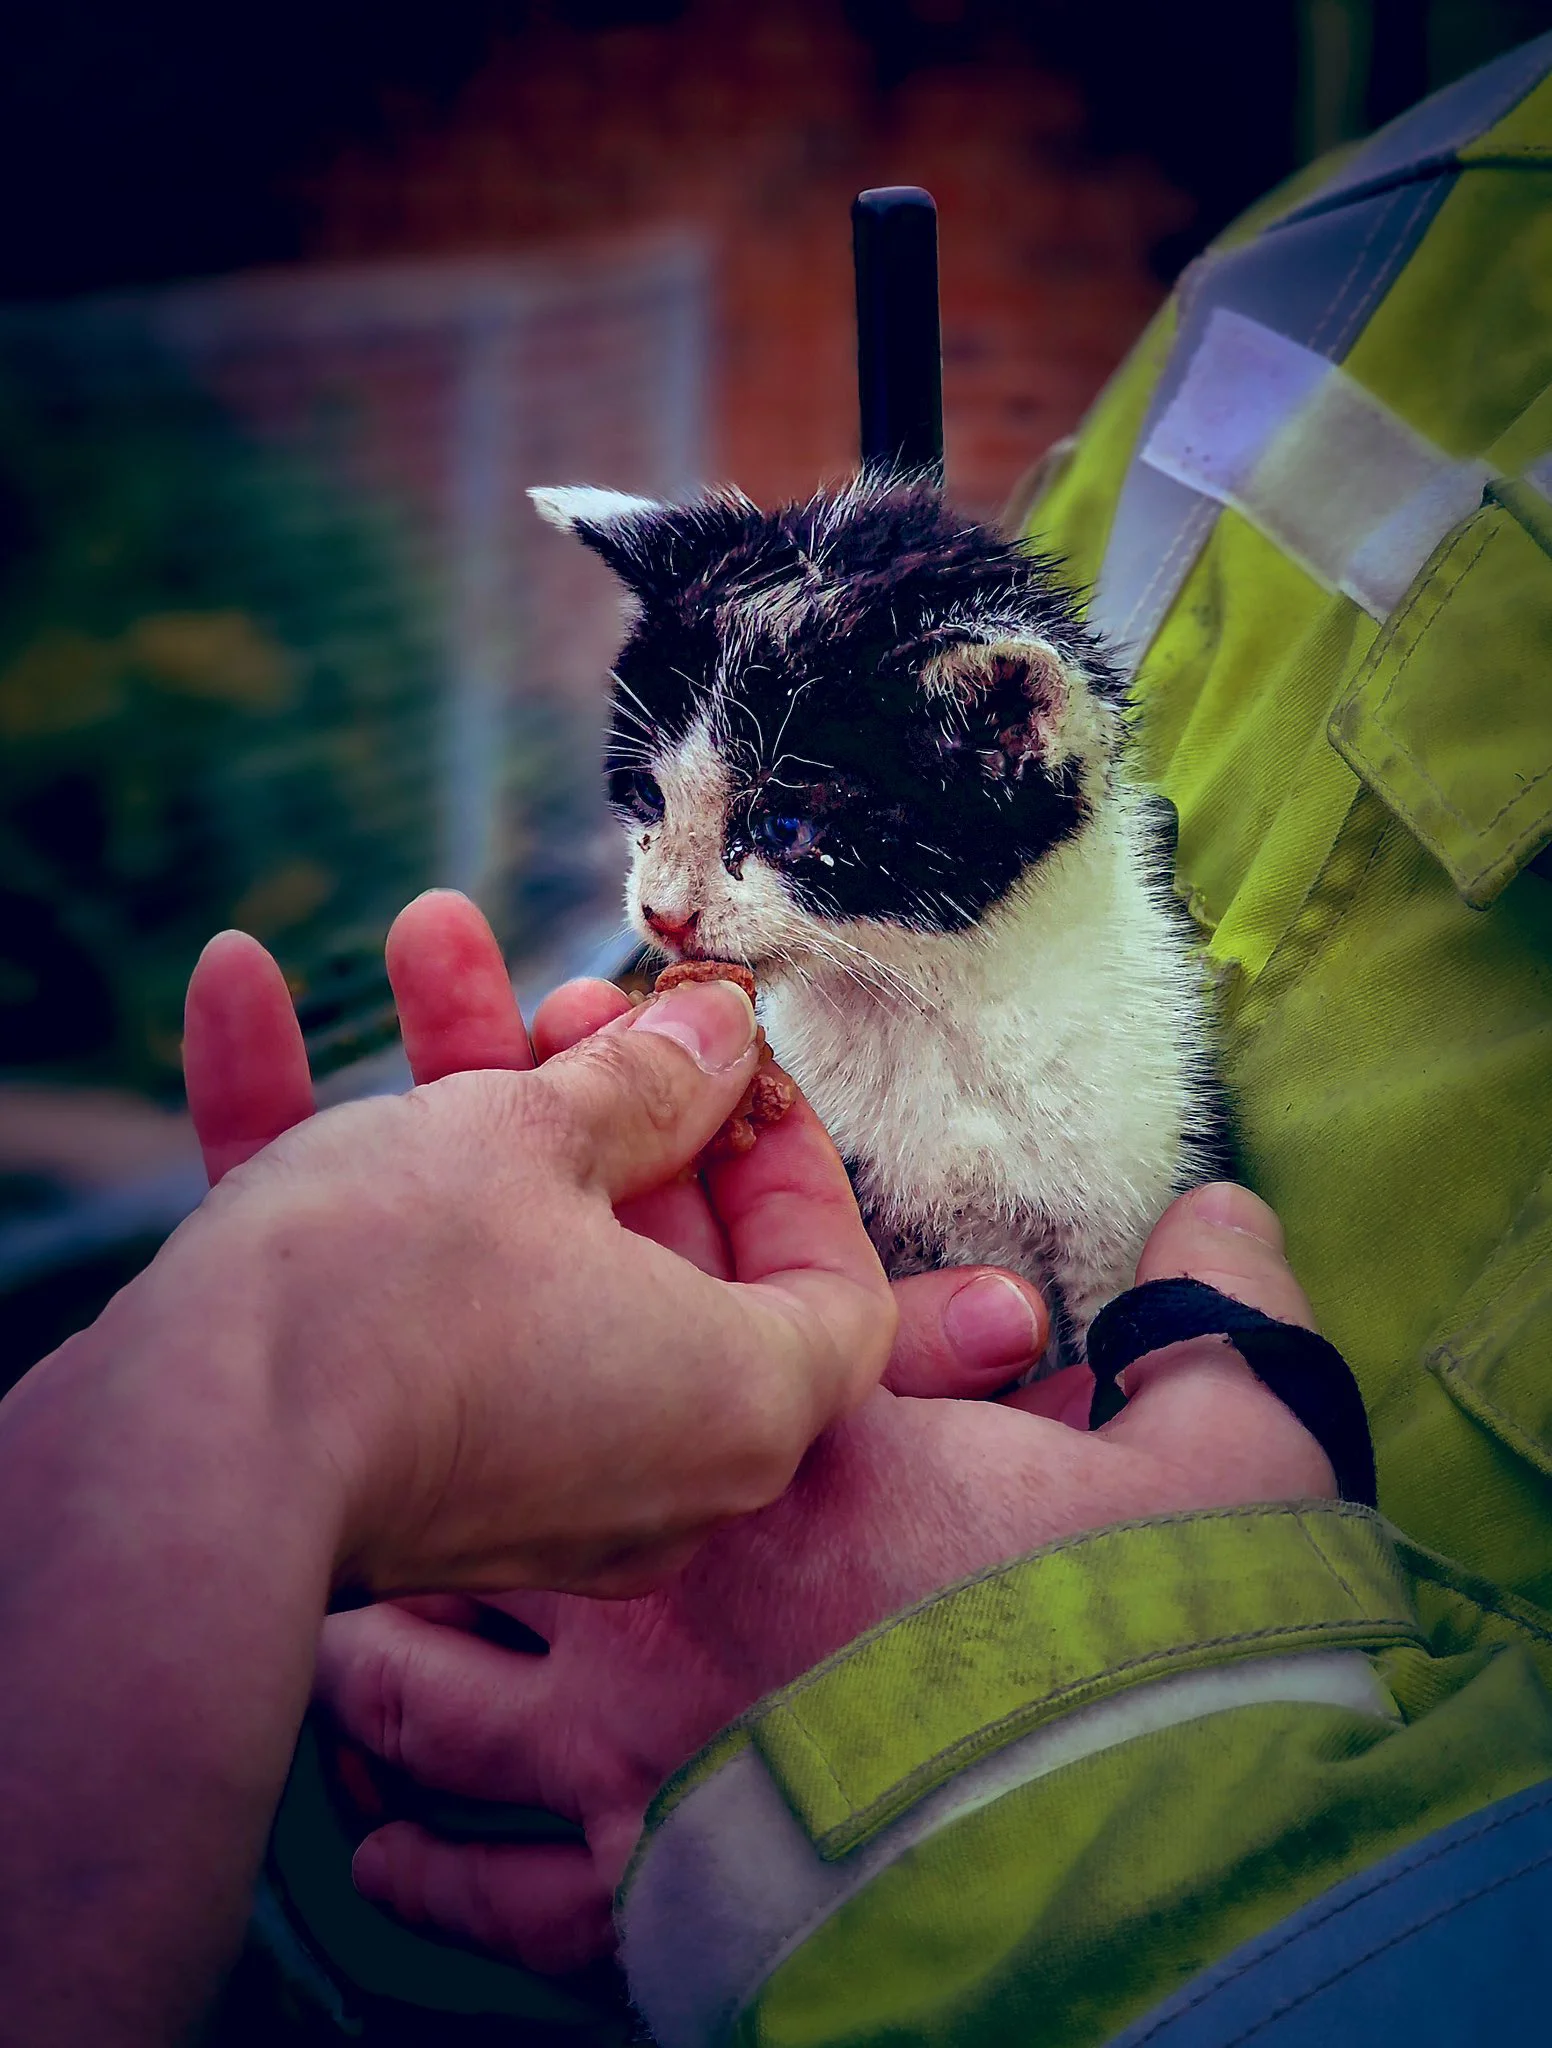 hands hold a tiny kitten and offer it some food